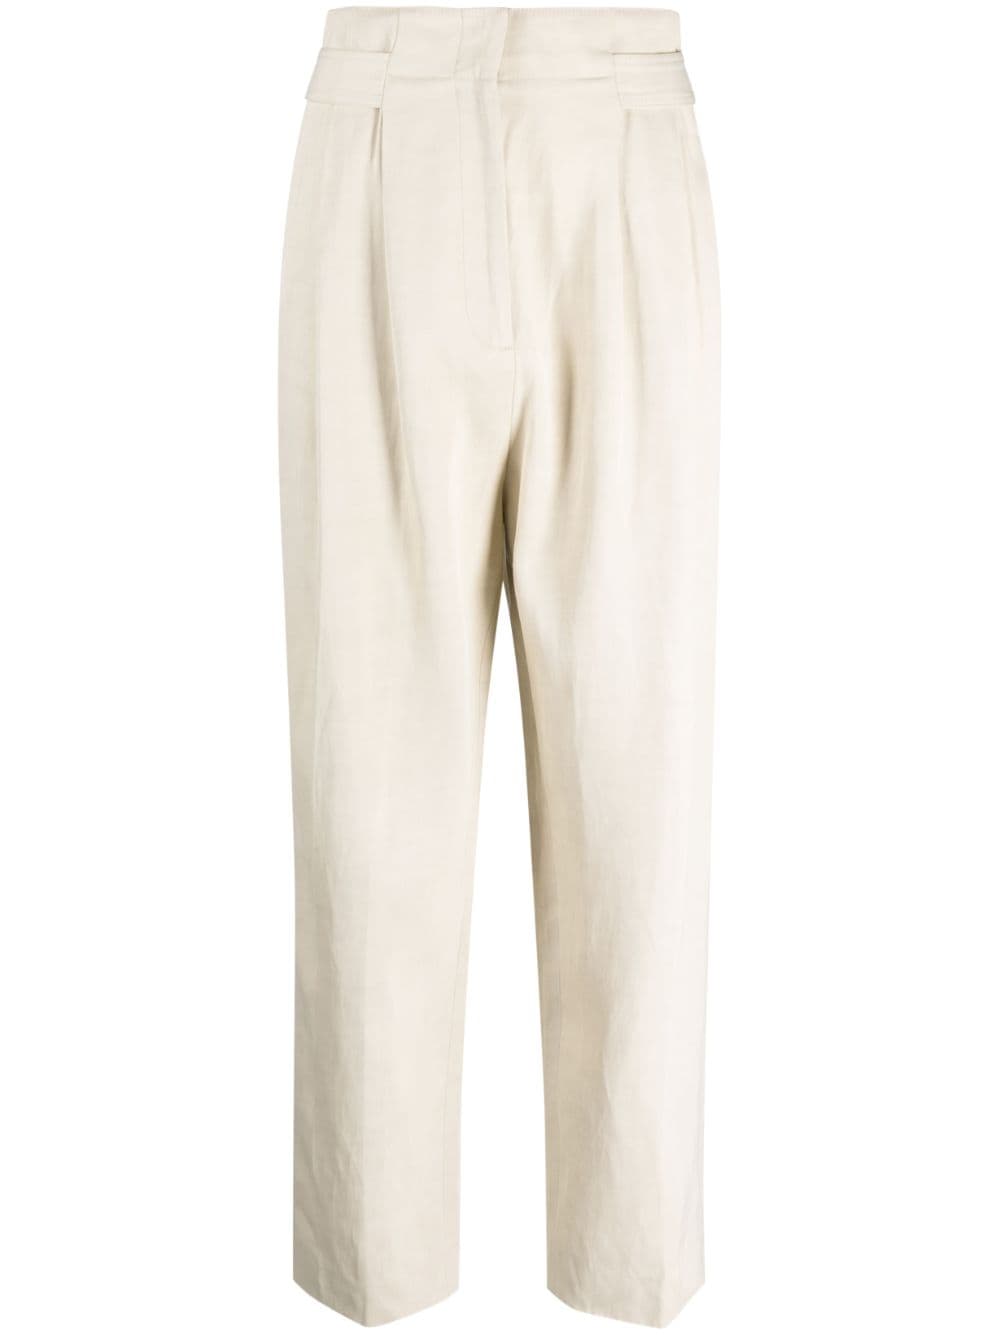 TOTEME double-pleated trousers - Neutrals von TOTEME